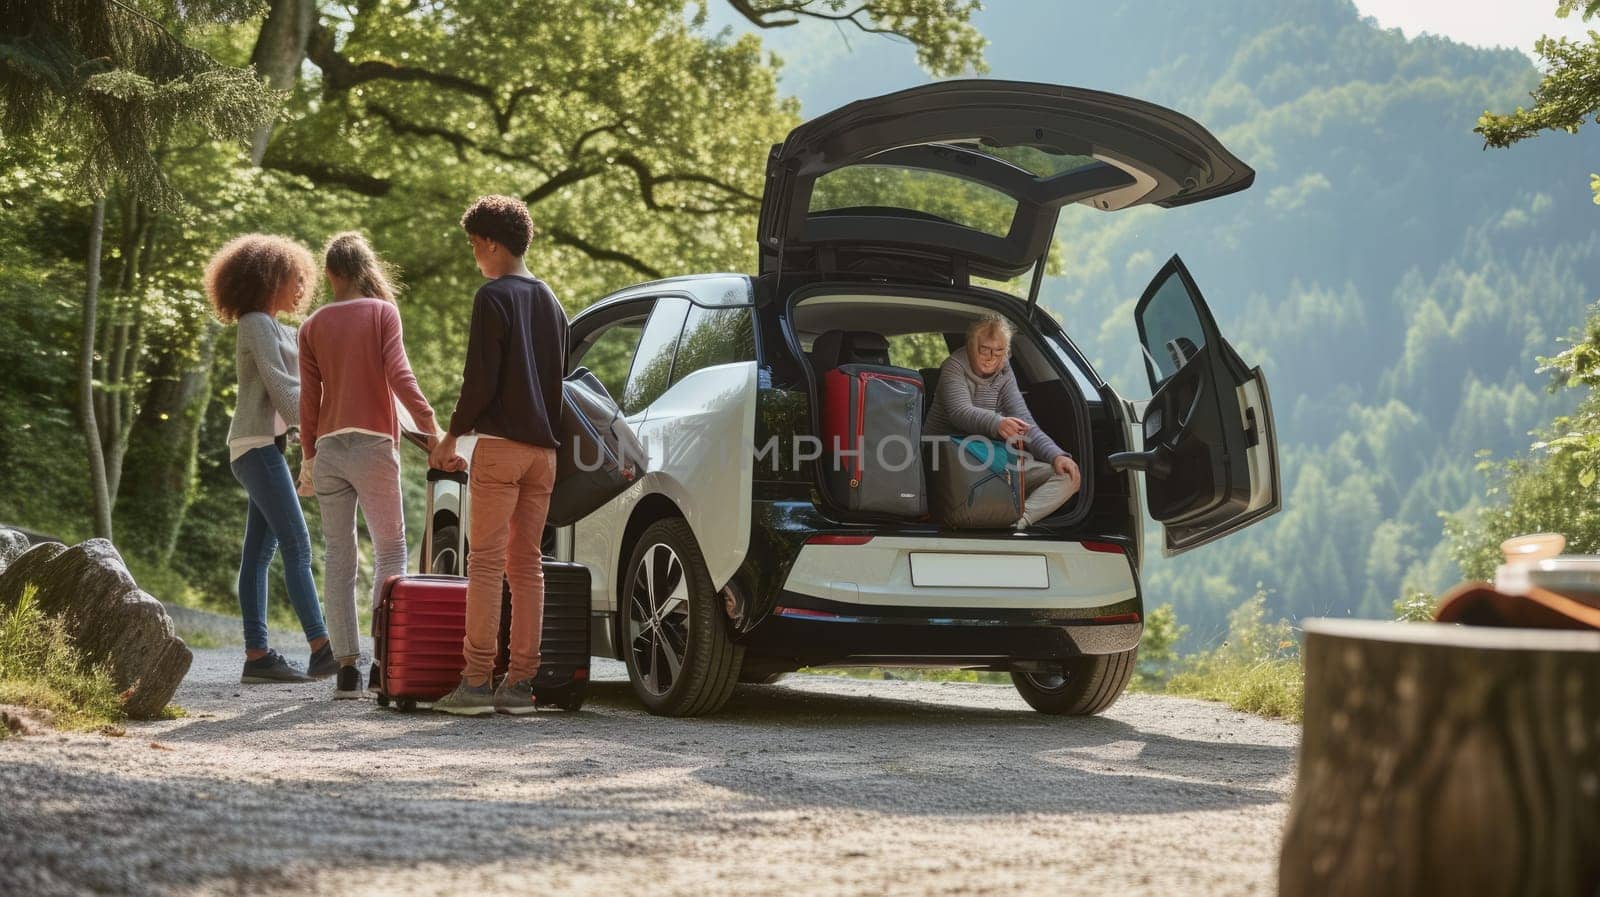 A family is loading luggage into the rear of their vehicle for a leisurely travel, surrounded by trees and plants. AIG41